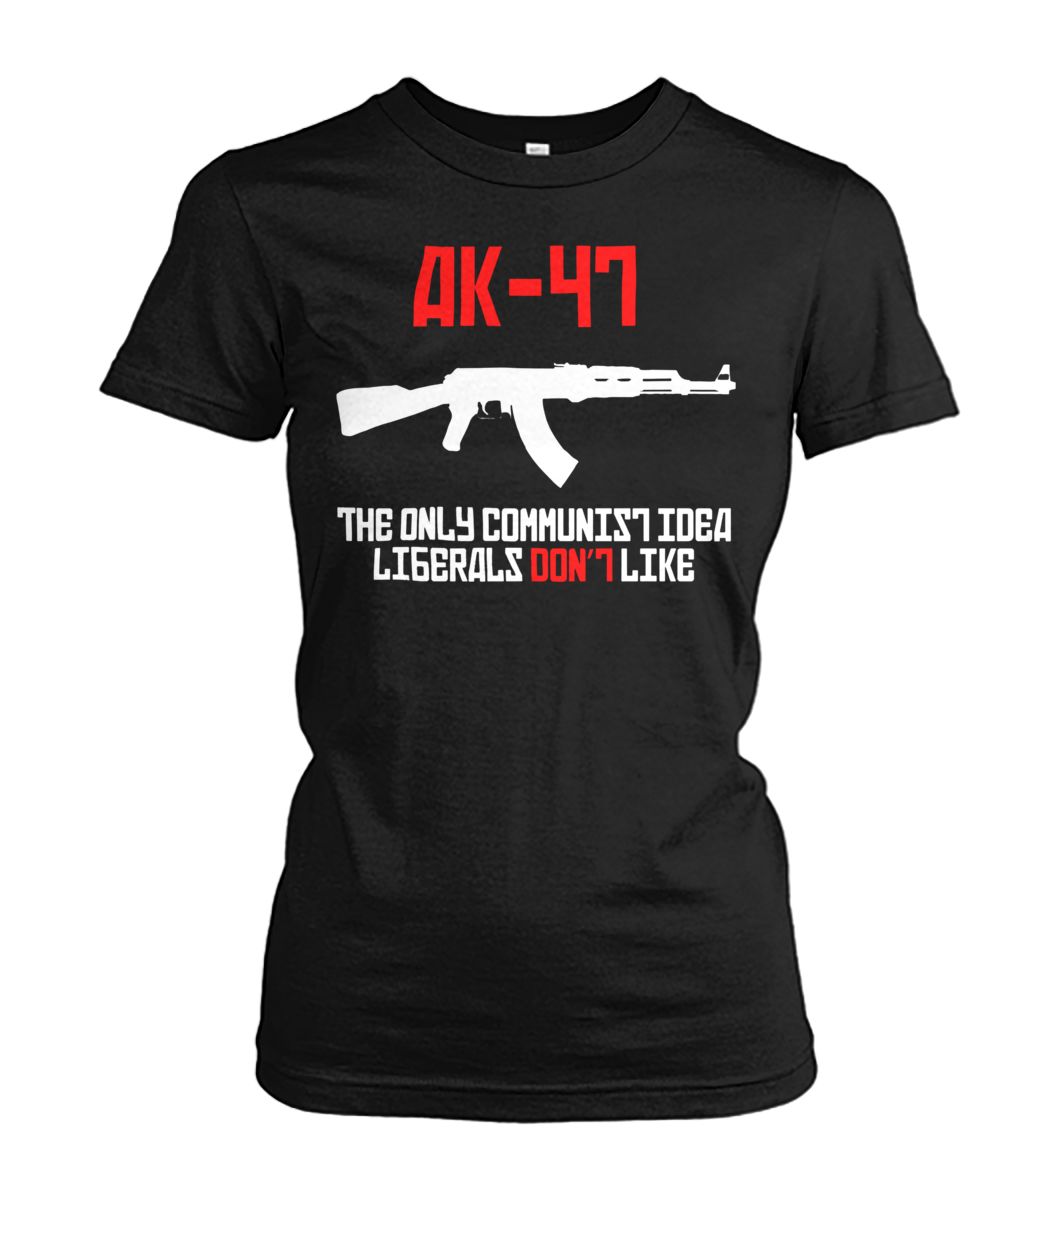 AK 47 the only communist idea liberals don't like women's crew tee